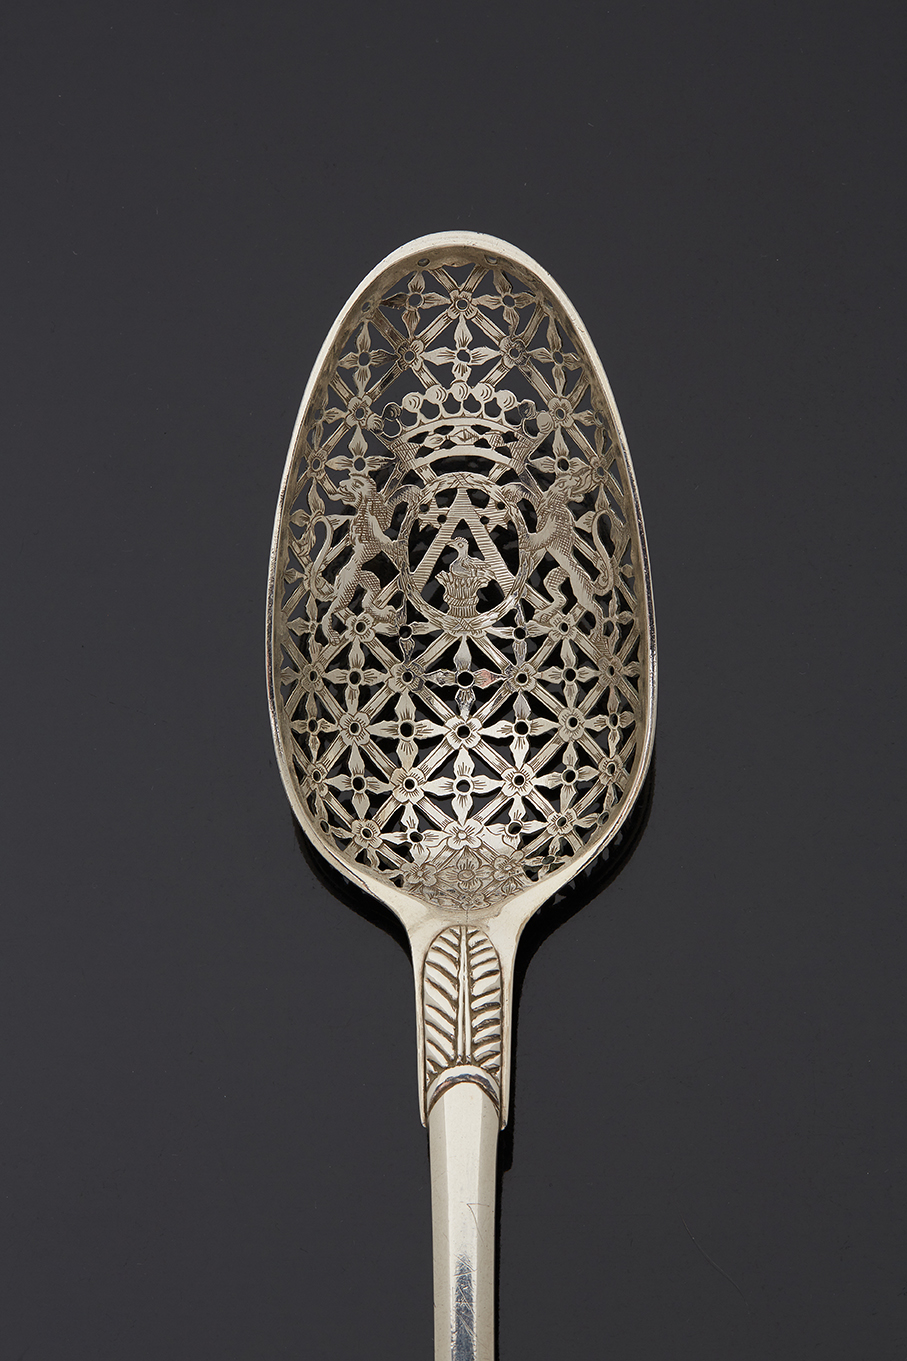 €33,280 Limoges, first half of 18th century. Silver olive spoon, single flat model engraved with coat of arms, master silversmith Pierre André Latache (admitted in 1720), l. 30.7 cm/12 in. Paris, Drouot, February 4, 2021. Ader auction house. Ms. Badillet.